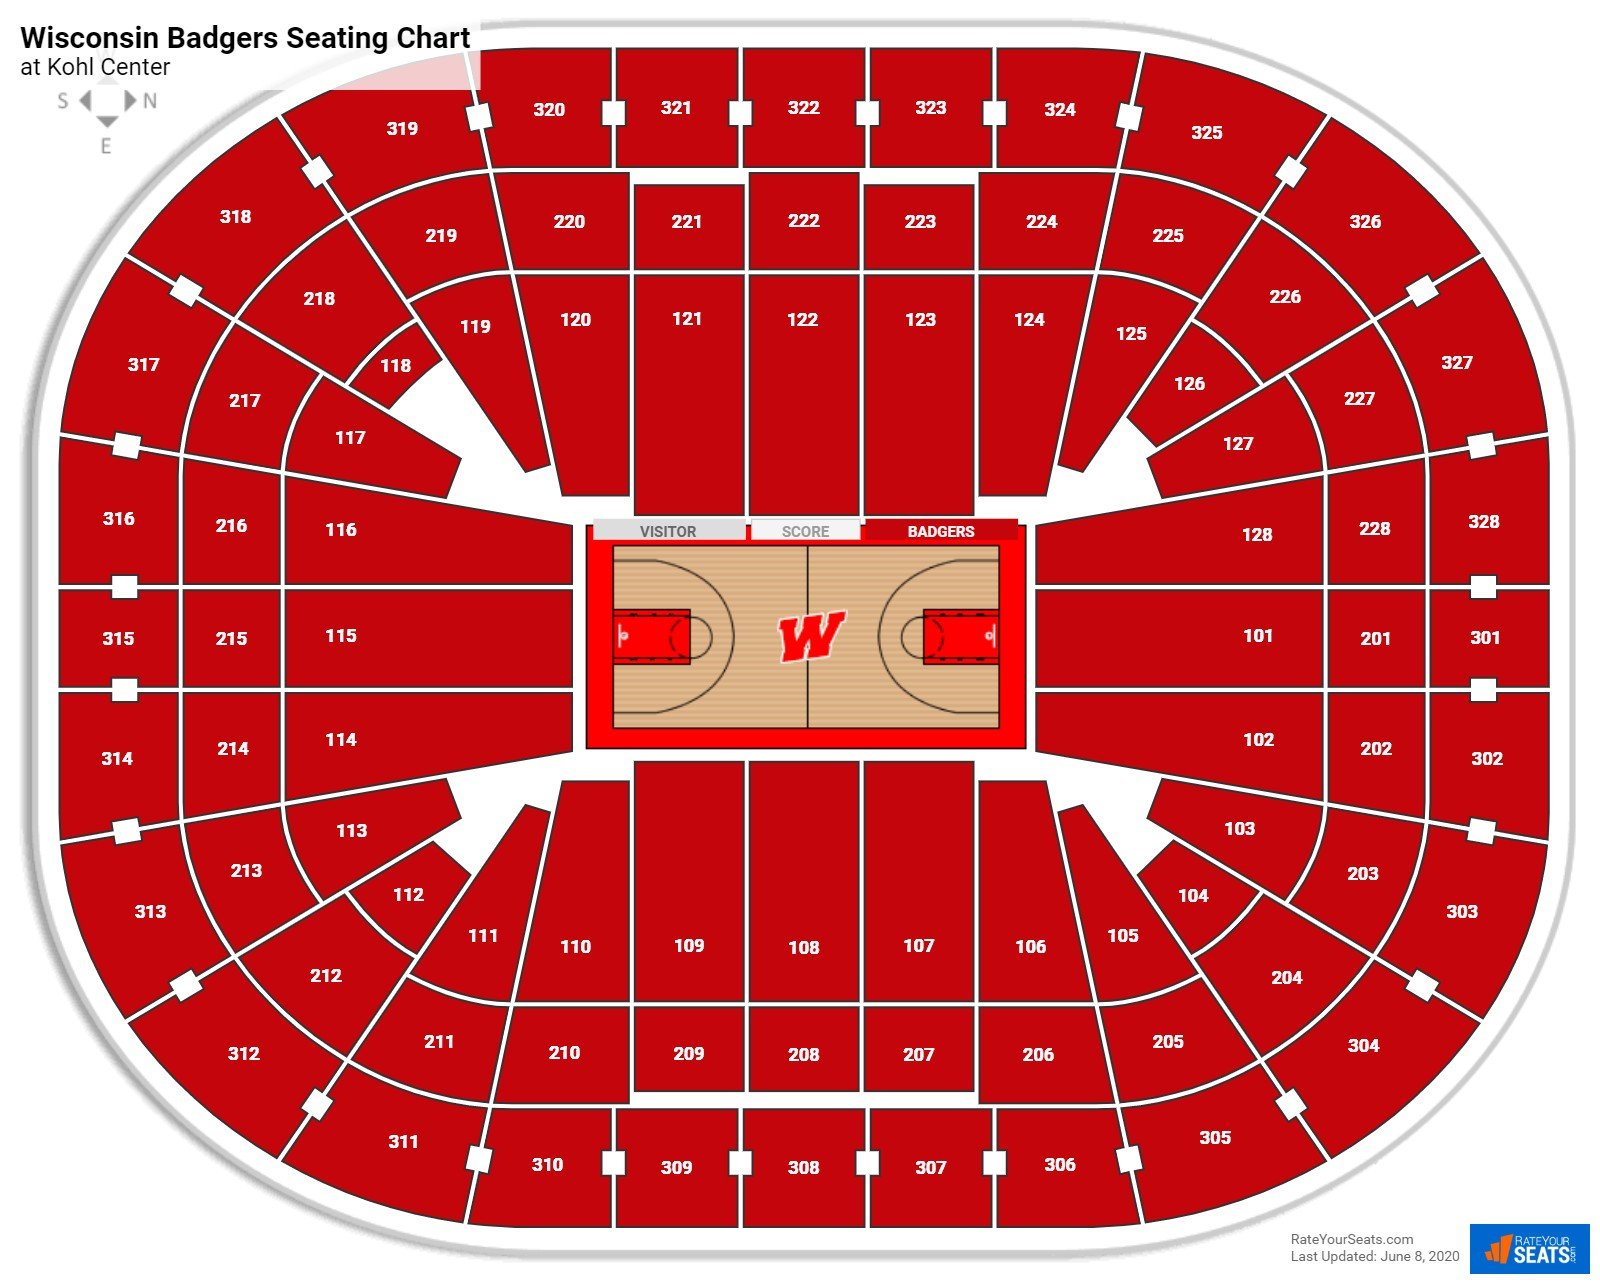 Kohl Center Seating Chart Rateyourseats Com